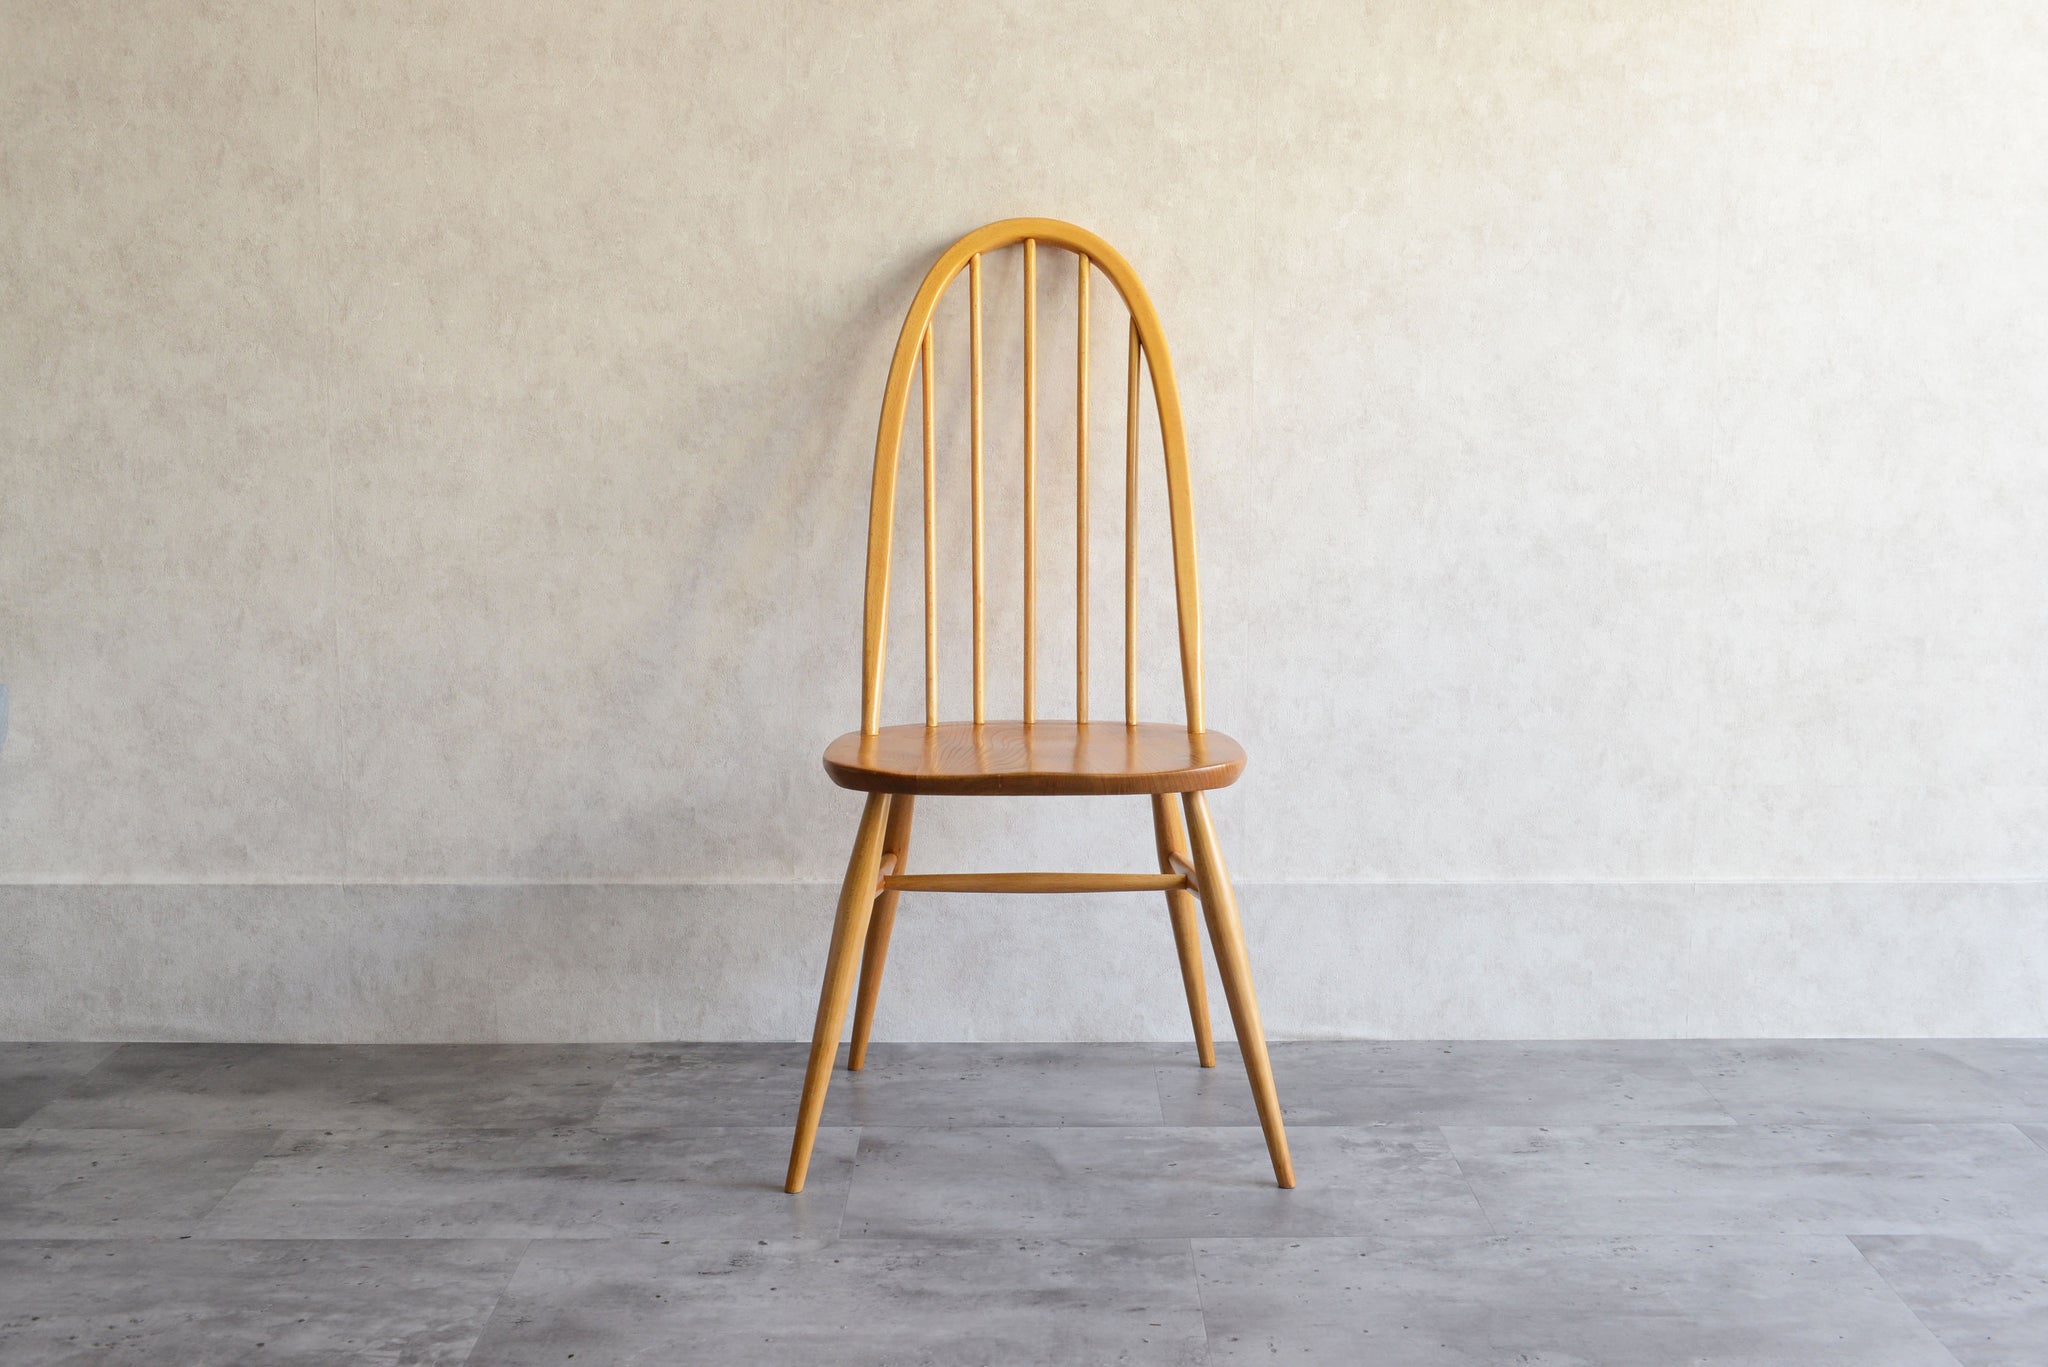 ERCOL　アーコール　クエーカーチェア02